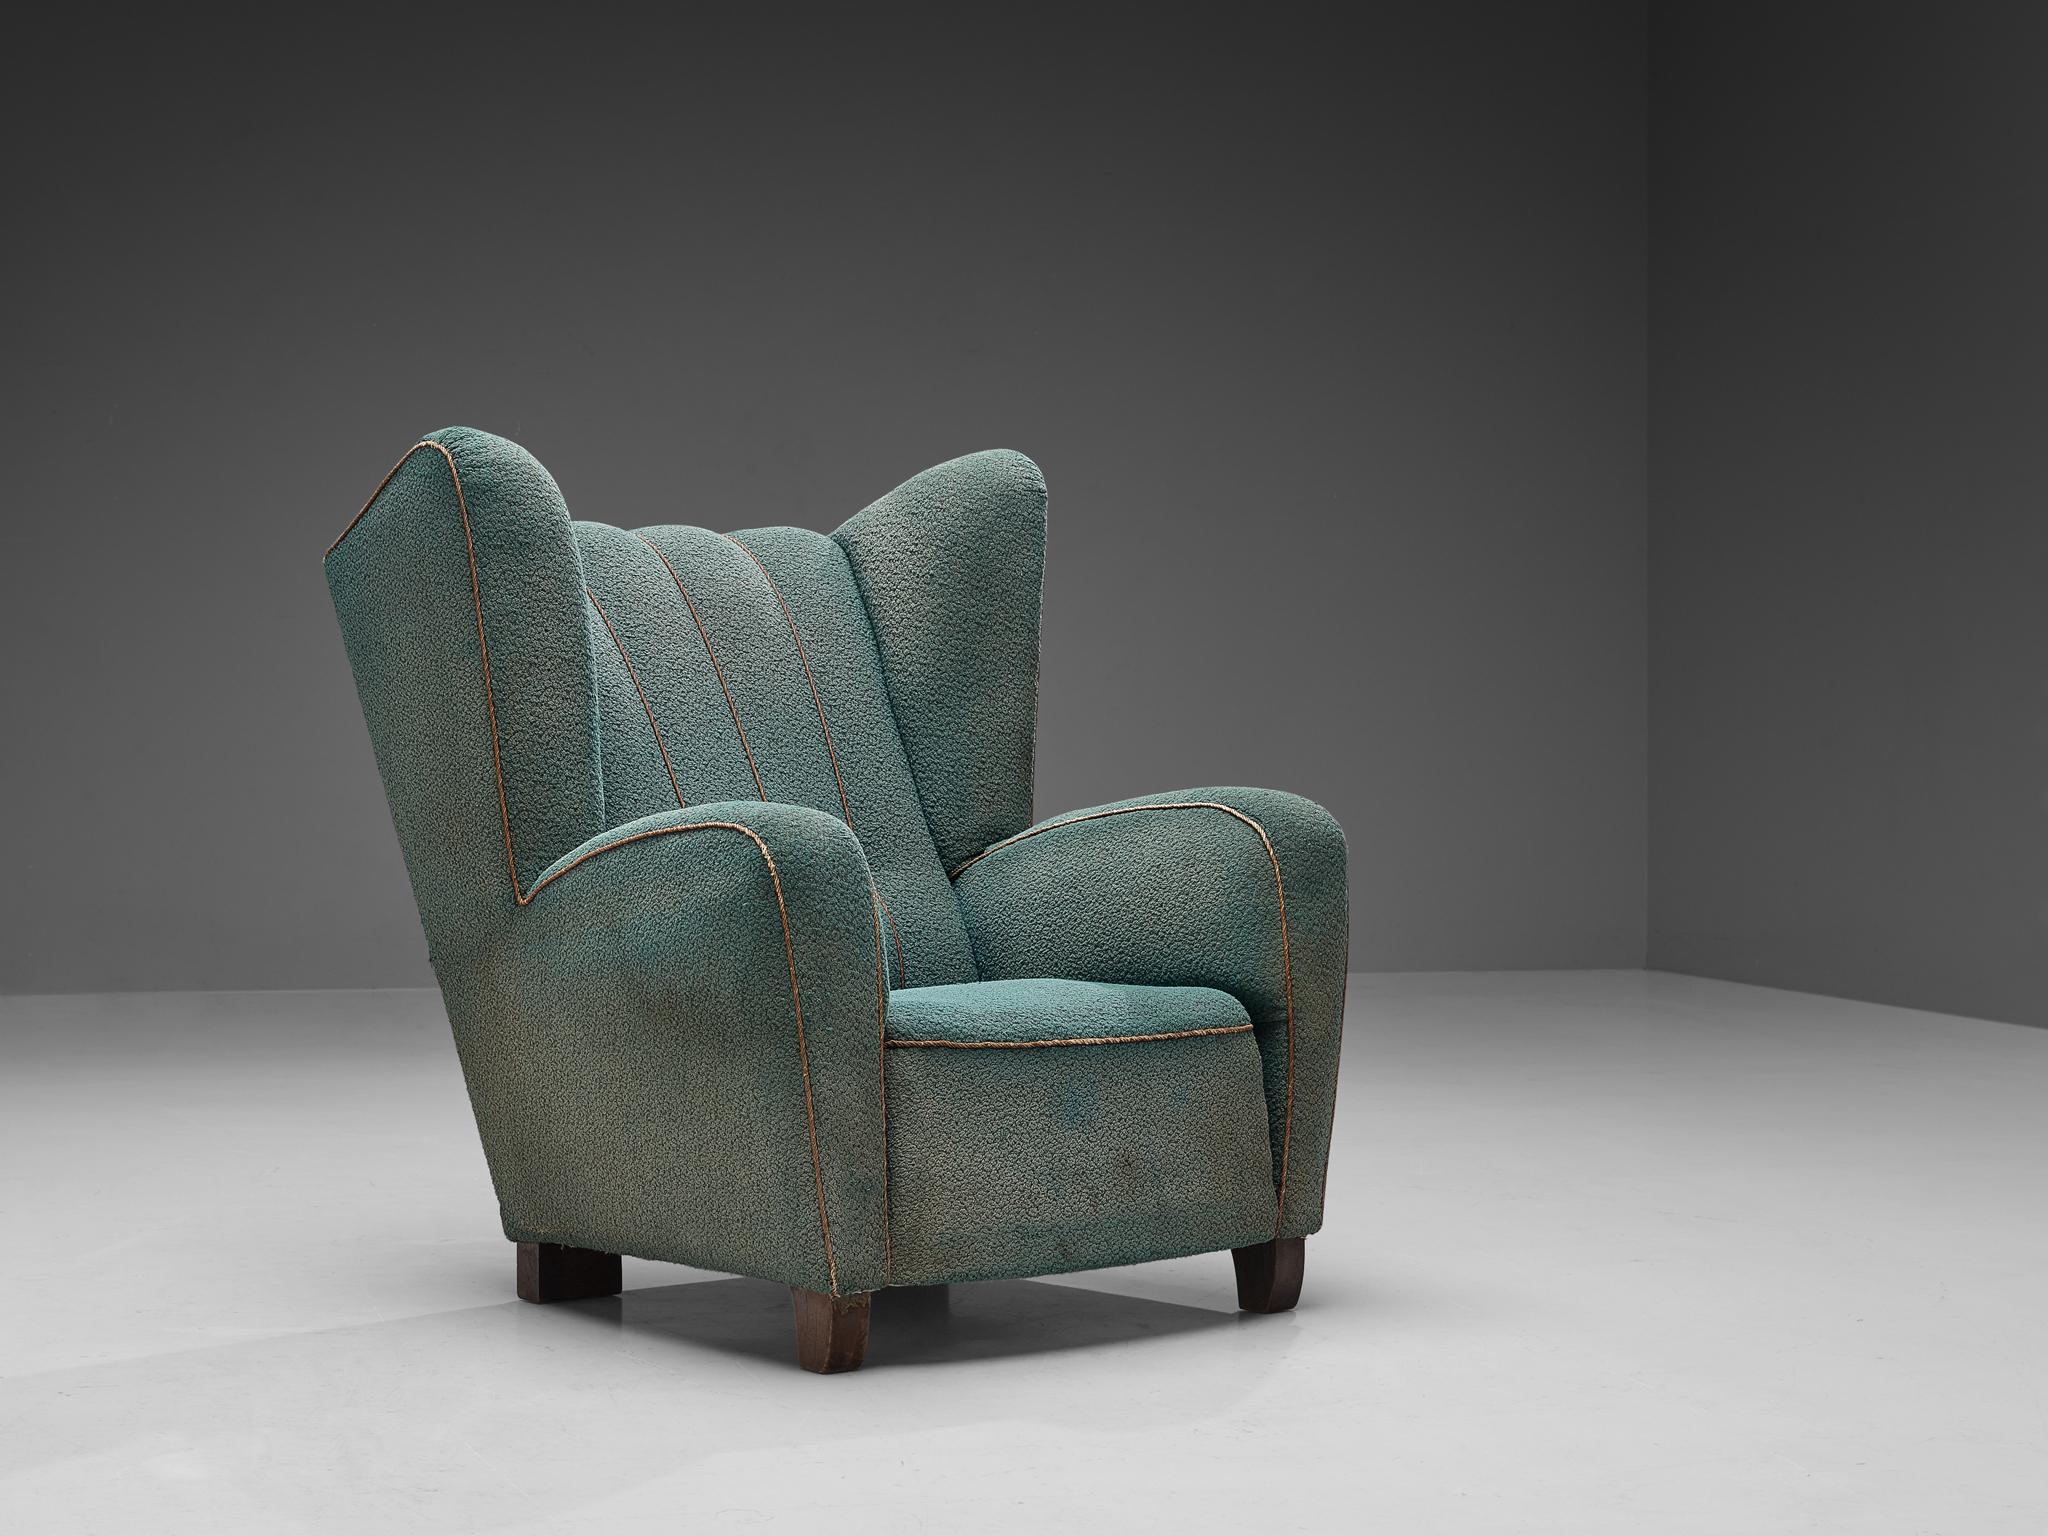 Wingback chair, bouclé, stained beech, Scandinavia, 1940s

This bulky wingback chair strongly resembles de designs of Märta Blomstedt and provides the ultimate comfort due to the voluminous execution of the seating and backrest. An enclosed seat is